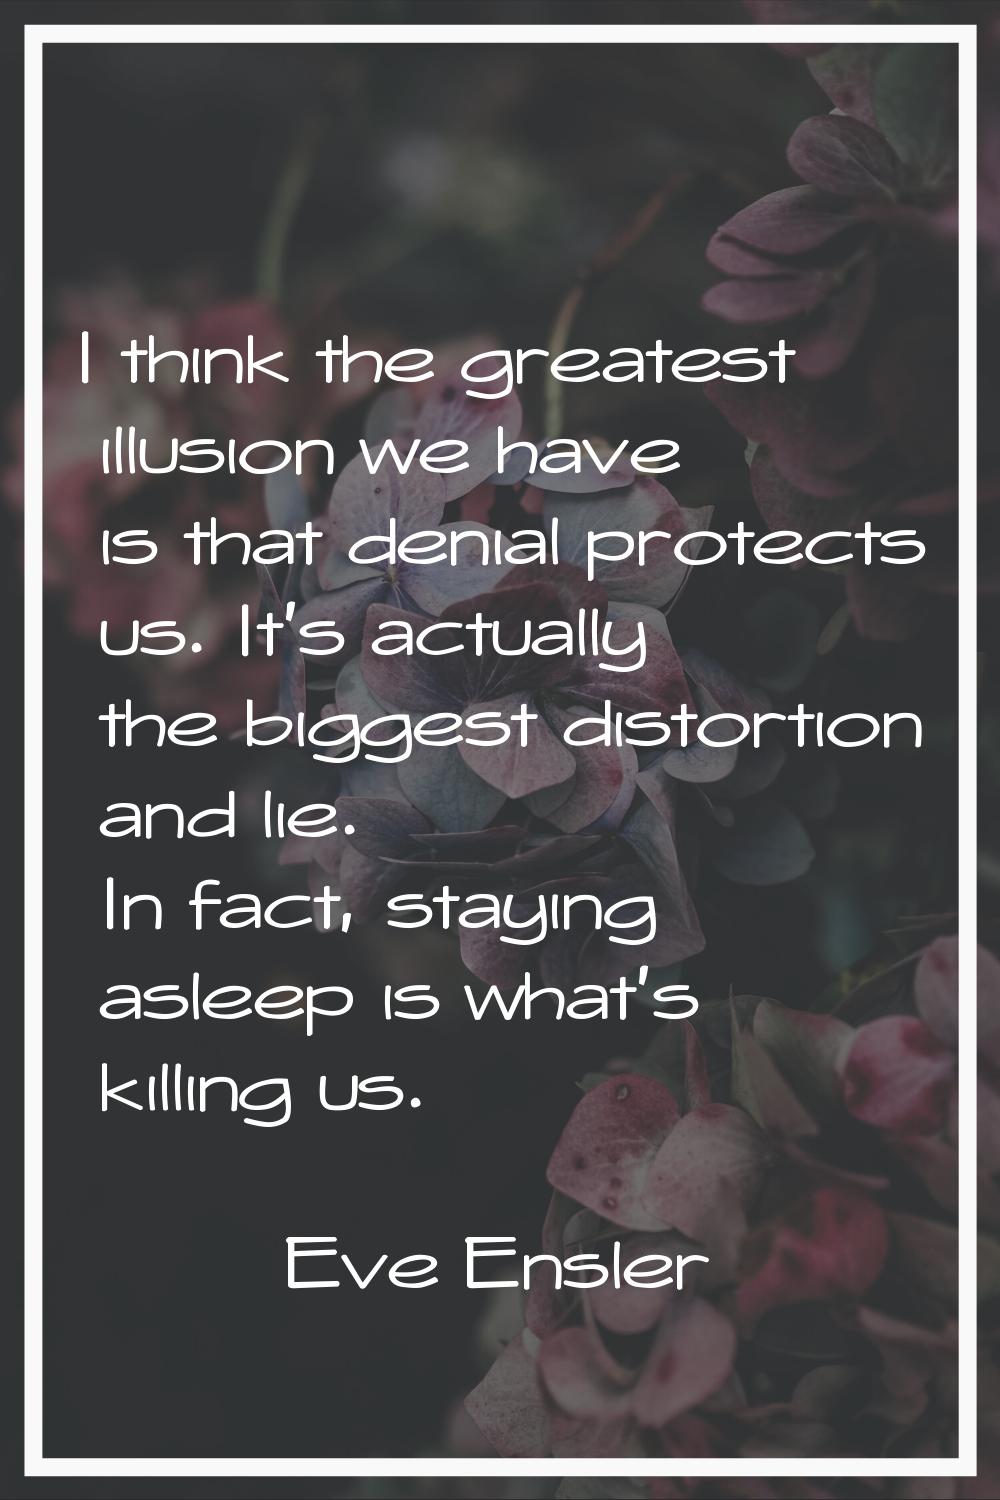 I think the greatest illusion we have is that denial protects us. It's actually the biggest distort